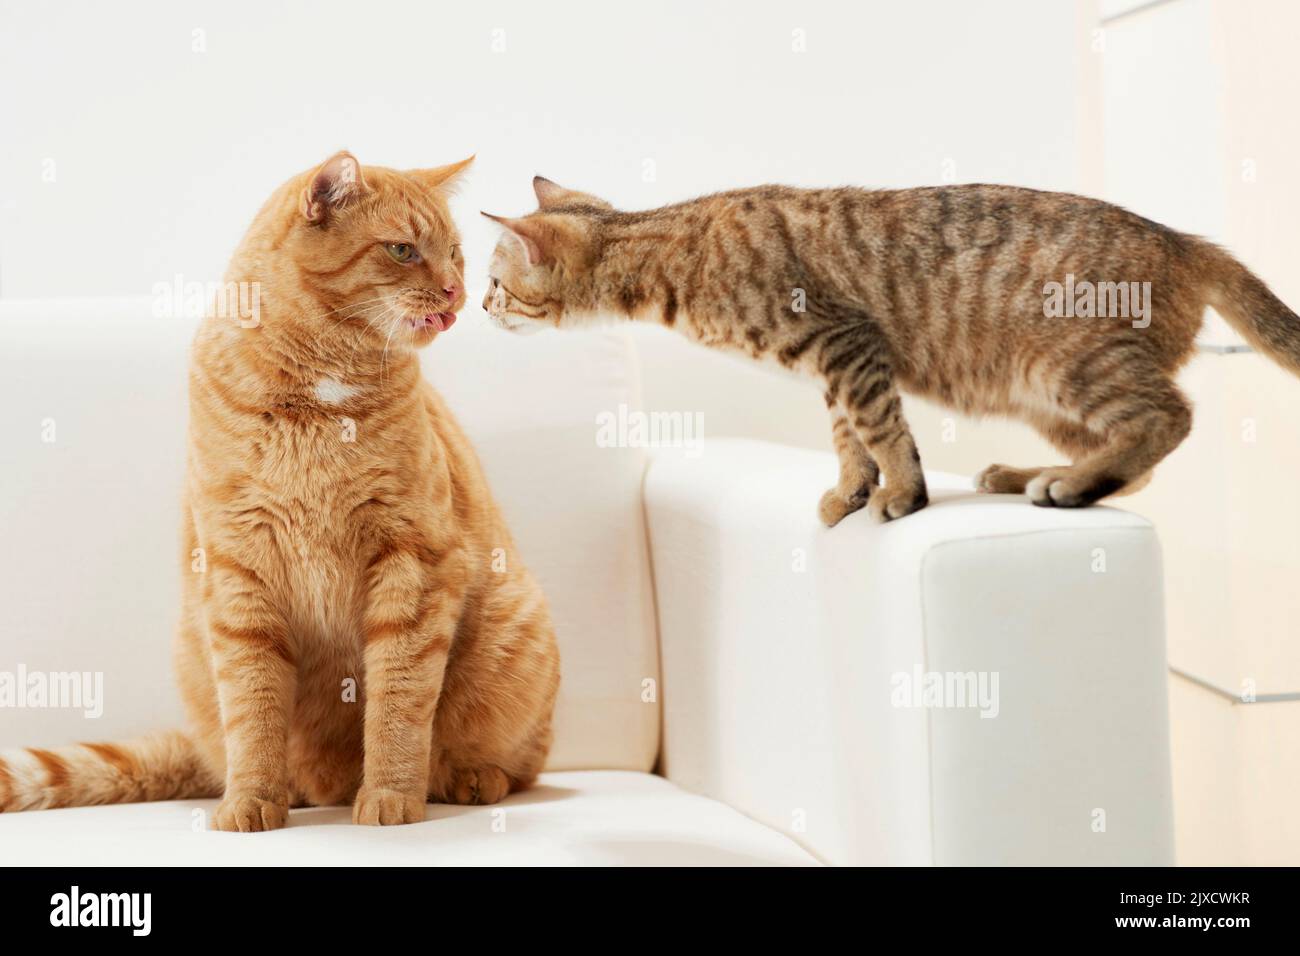 Domestic cat.. A tabby kitten and an adult cat on a couch. Germany Stock Photo